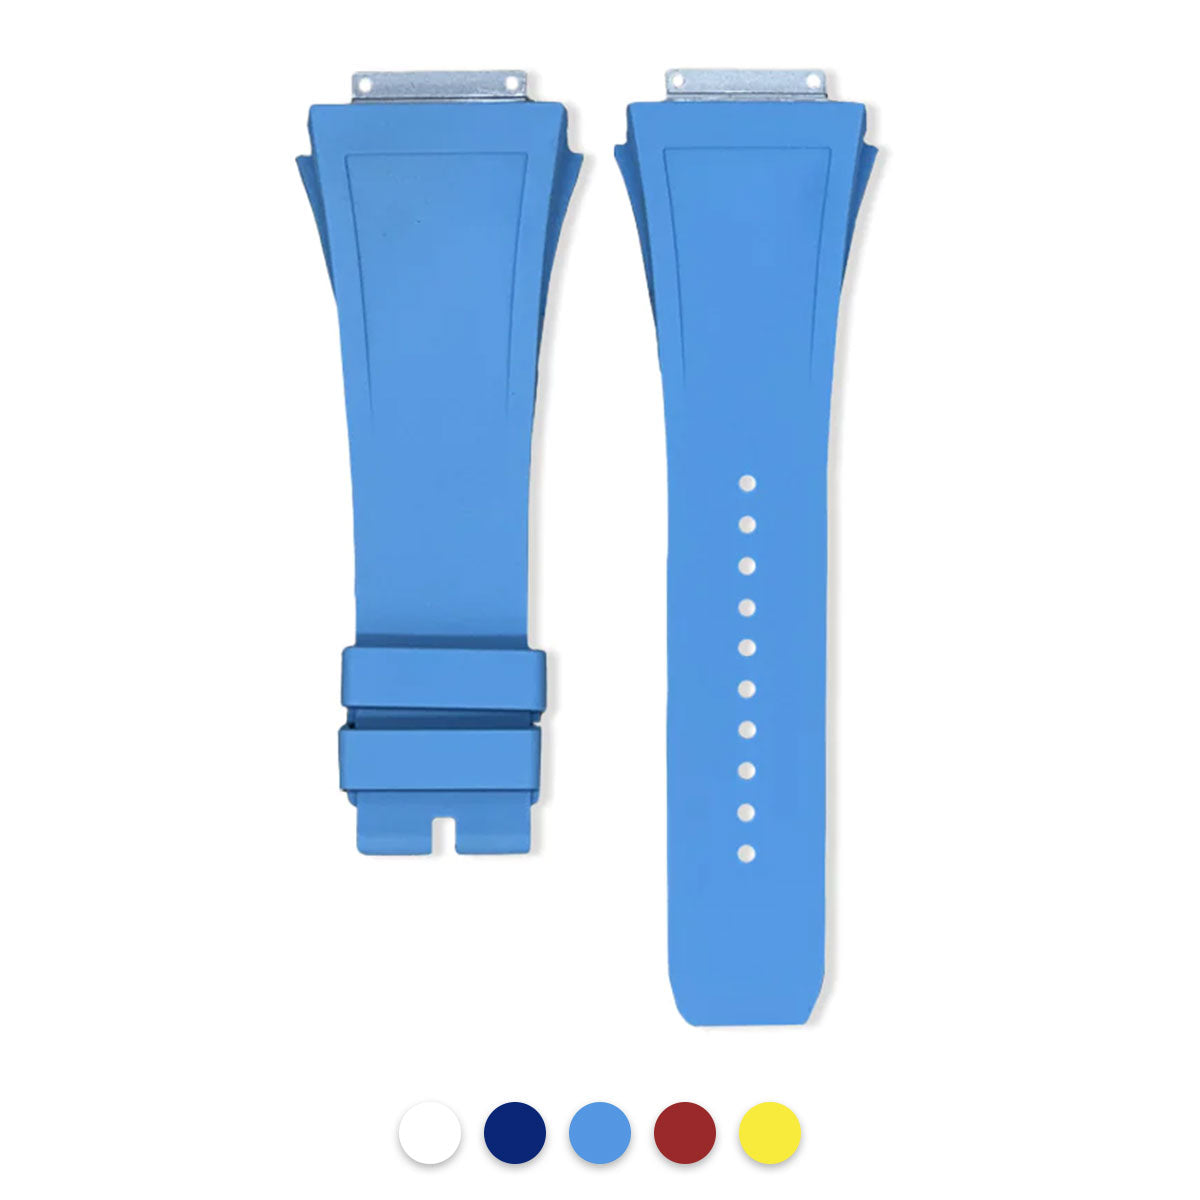 Richard Mille - Tempomat - FKM rubber integrated watchband (white, blue, red, yellow)